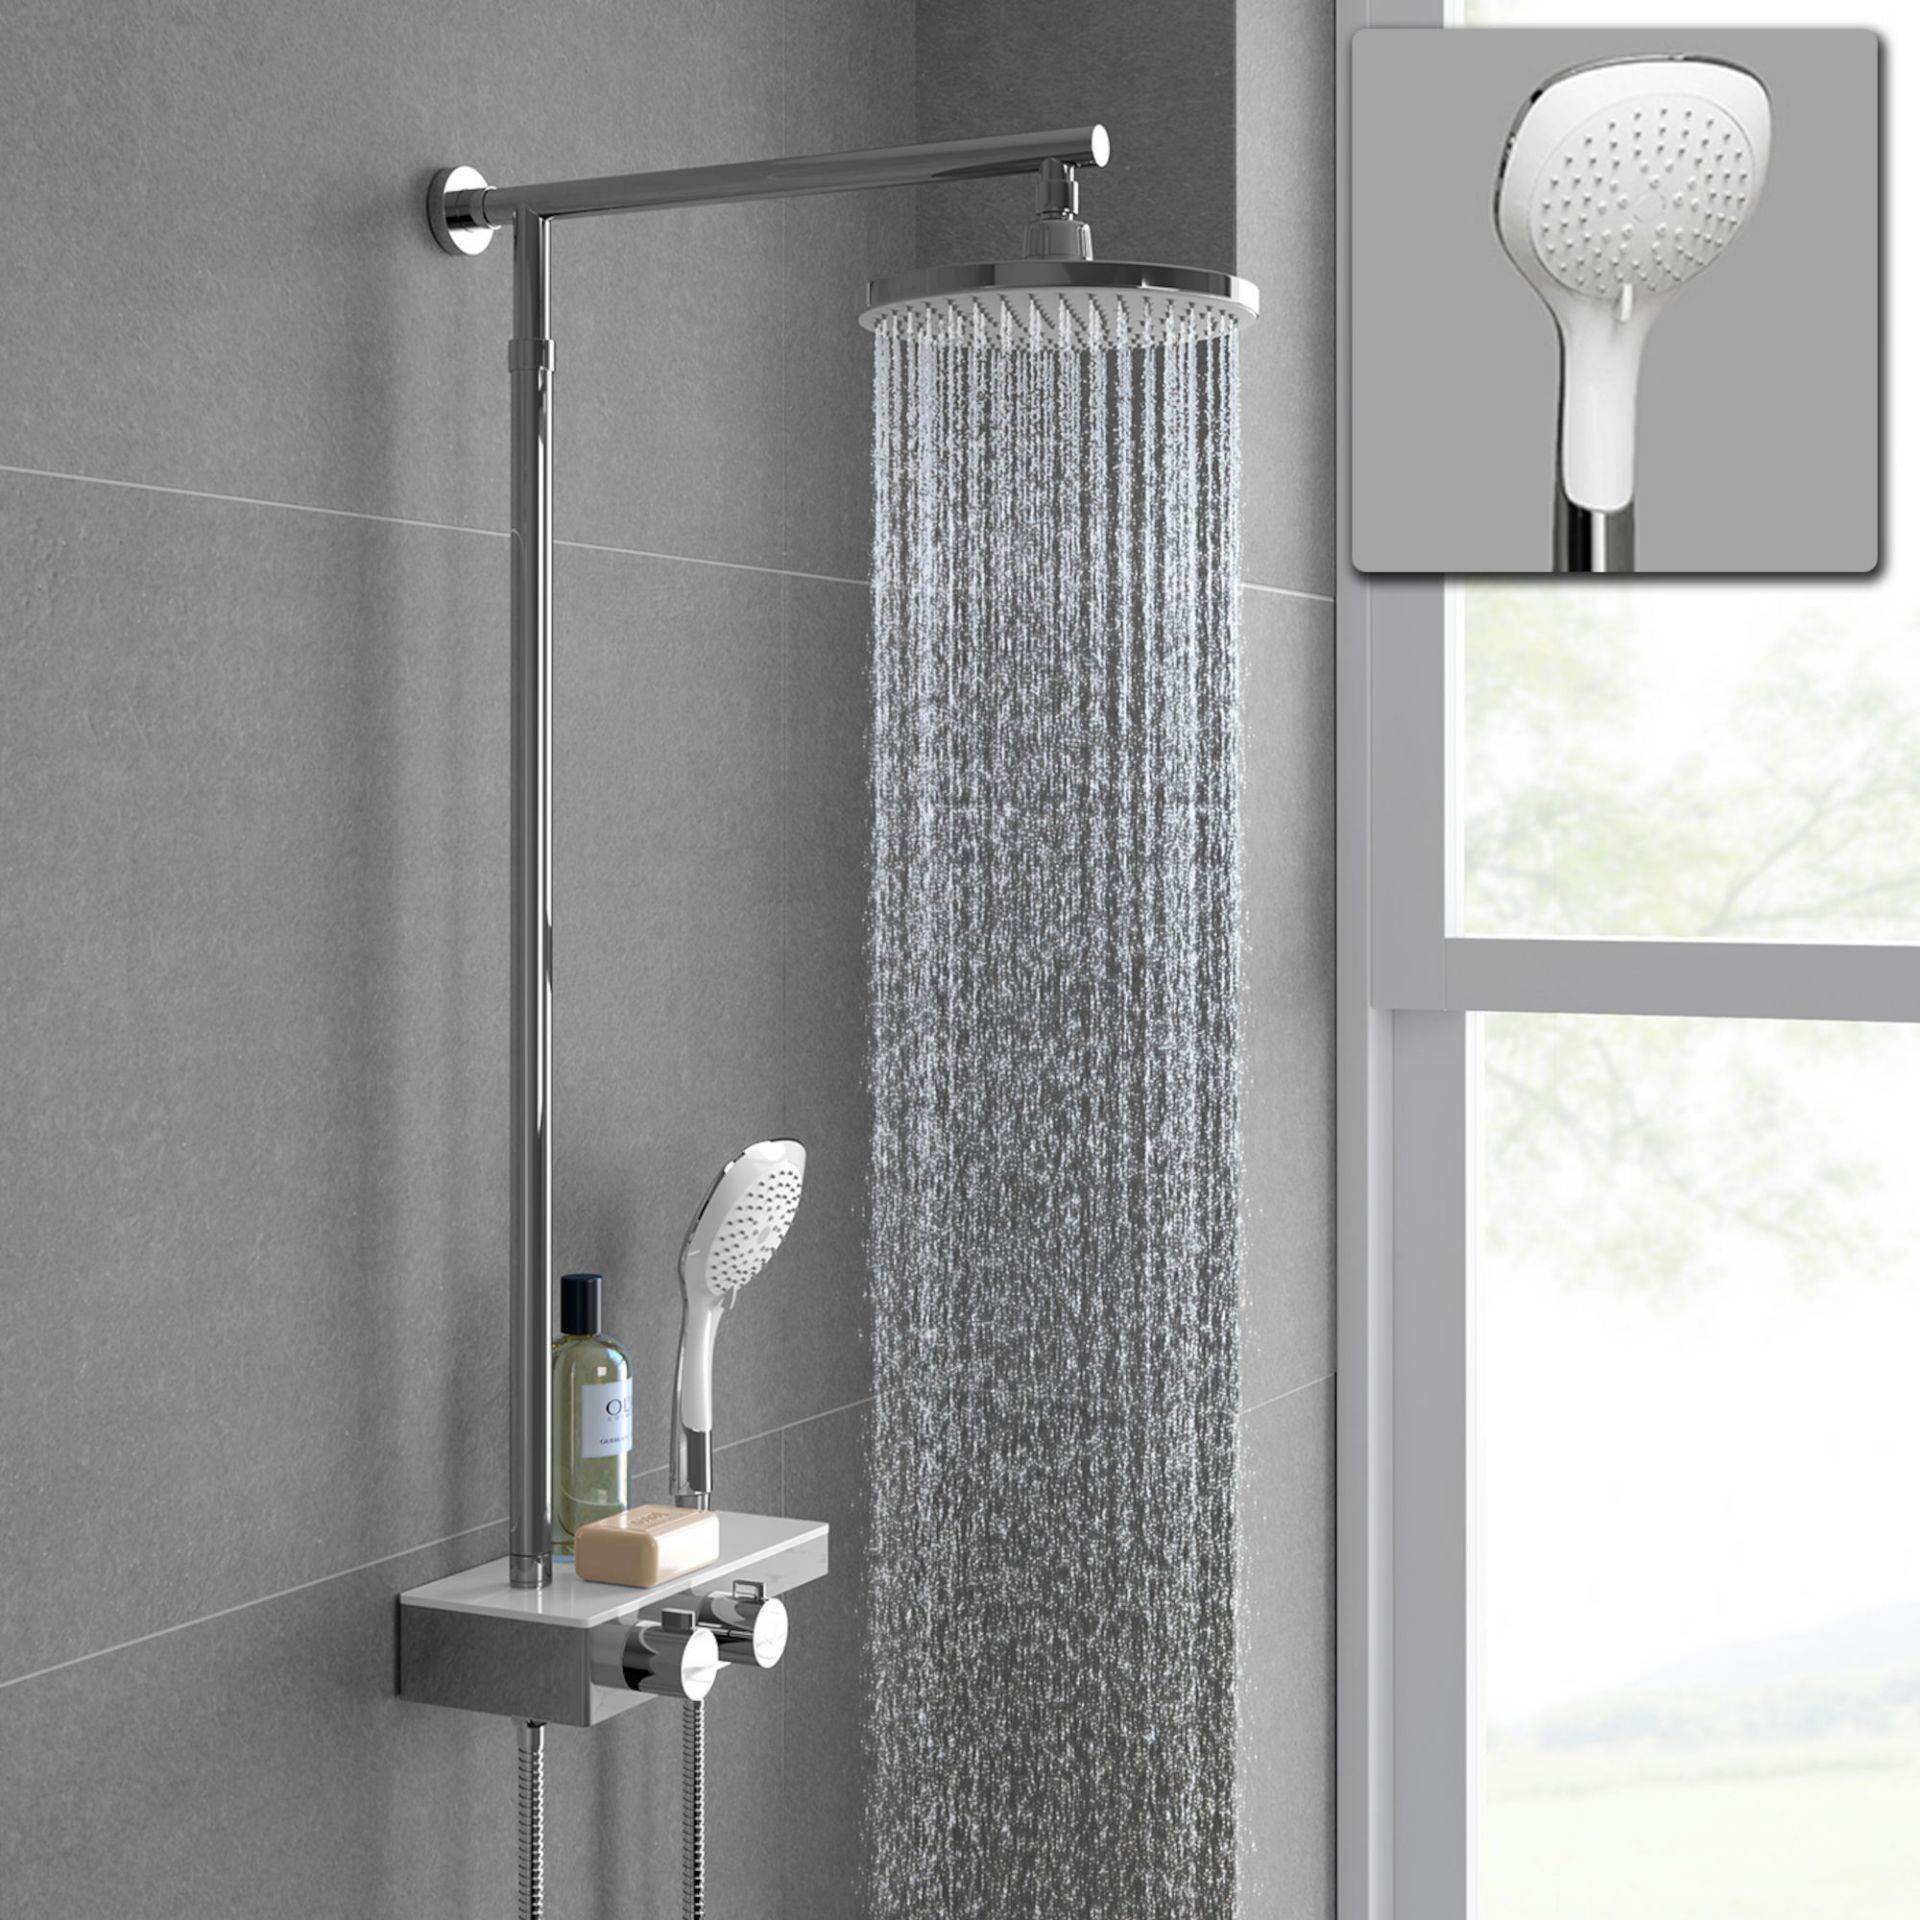 (MW41) Round Exposed Thermostatic Mixer Shower Kit Medium Head & Shelf. RRP £349.99. Cool to touch - Bild 5 aus 6